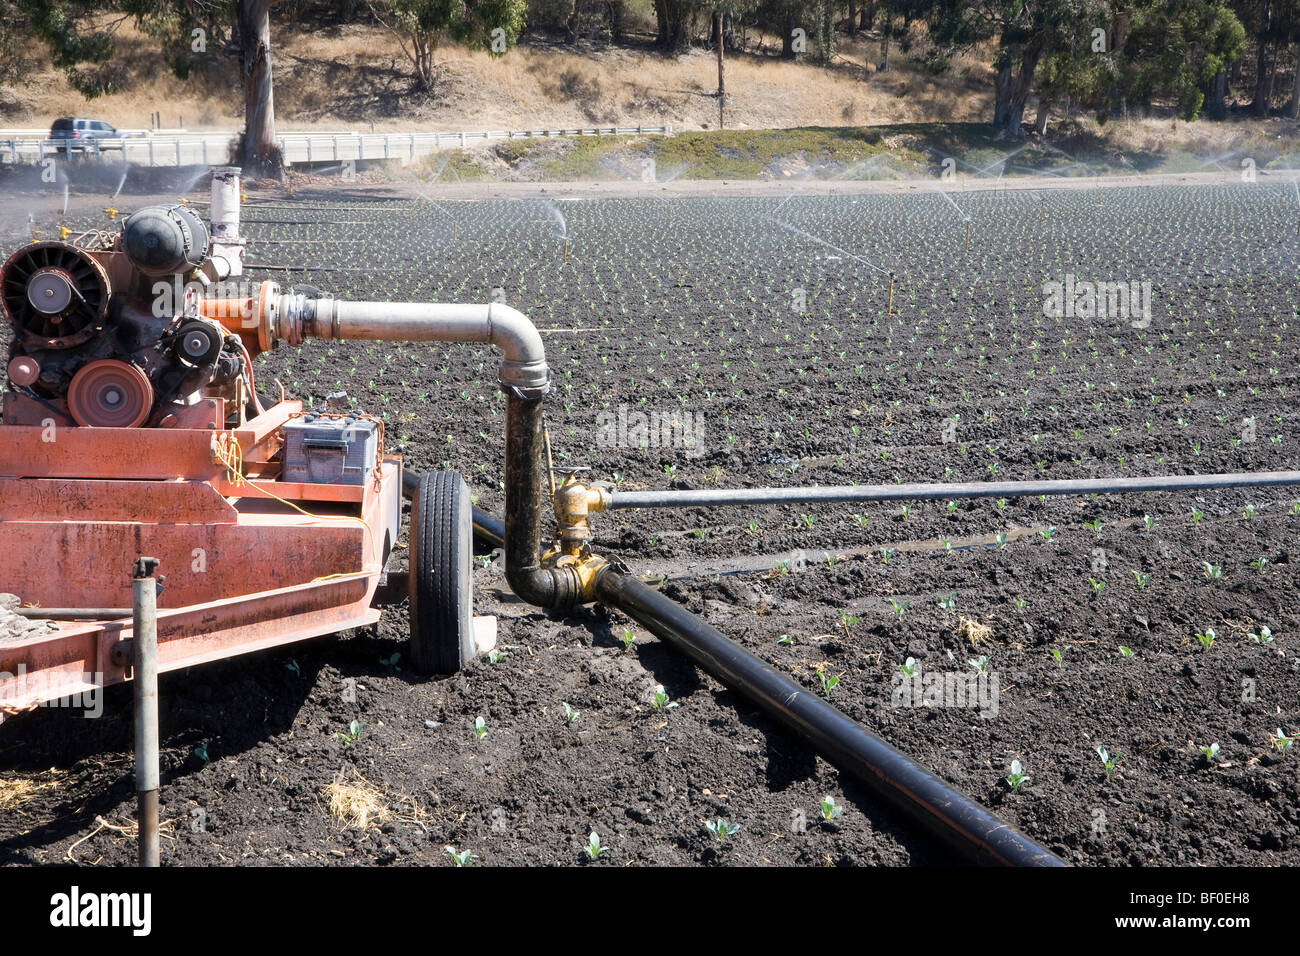 Irrigation plant in action, Lompoc in California, USA Stock Photo